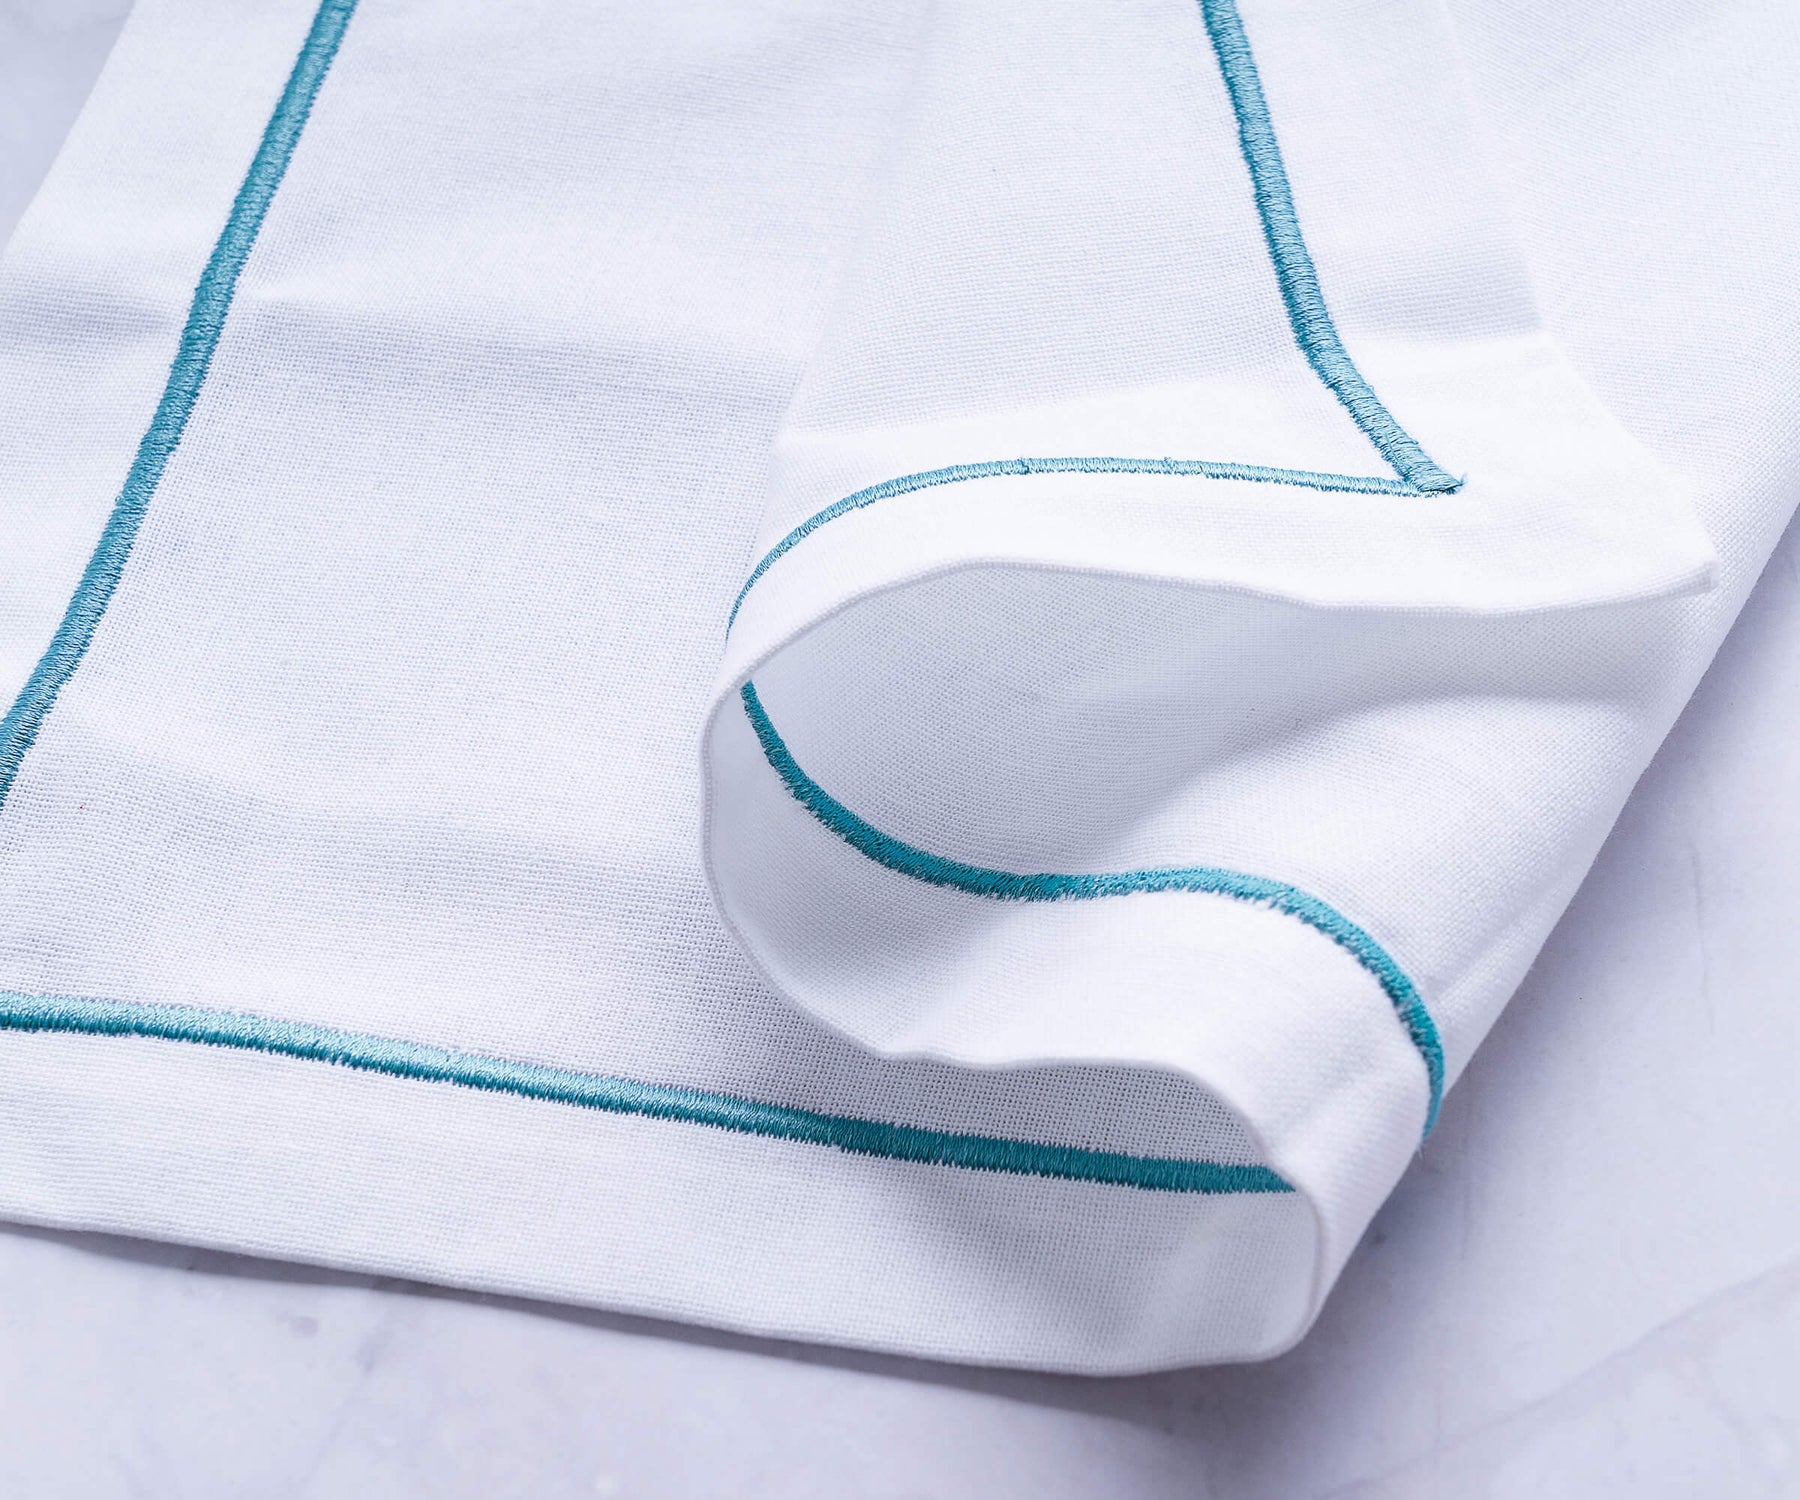 White dinner napkin with blue and green borders